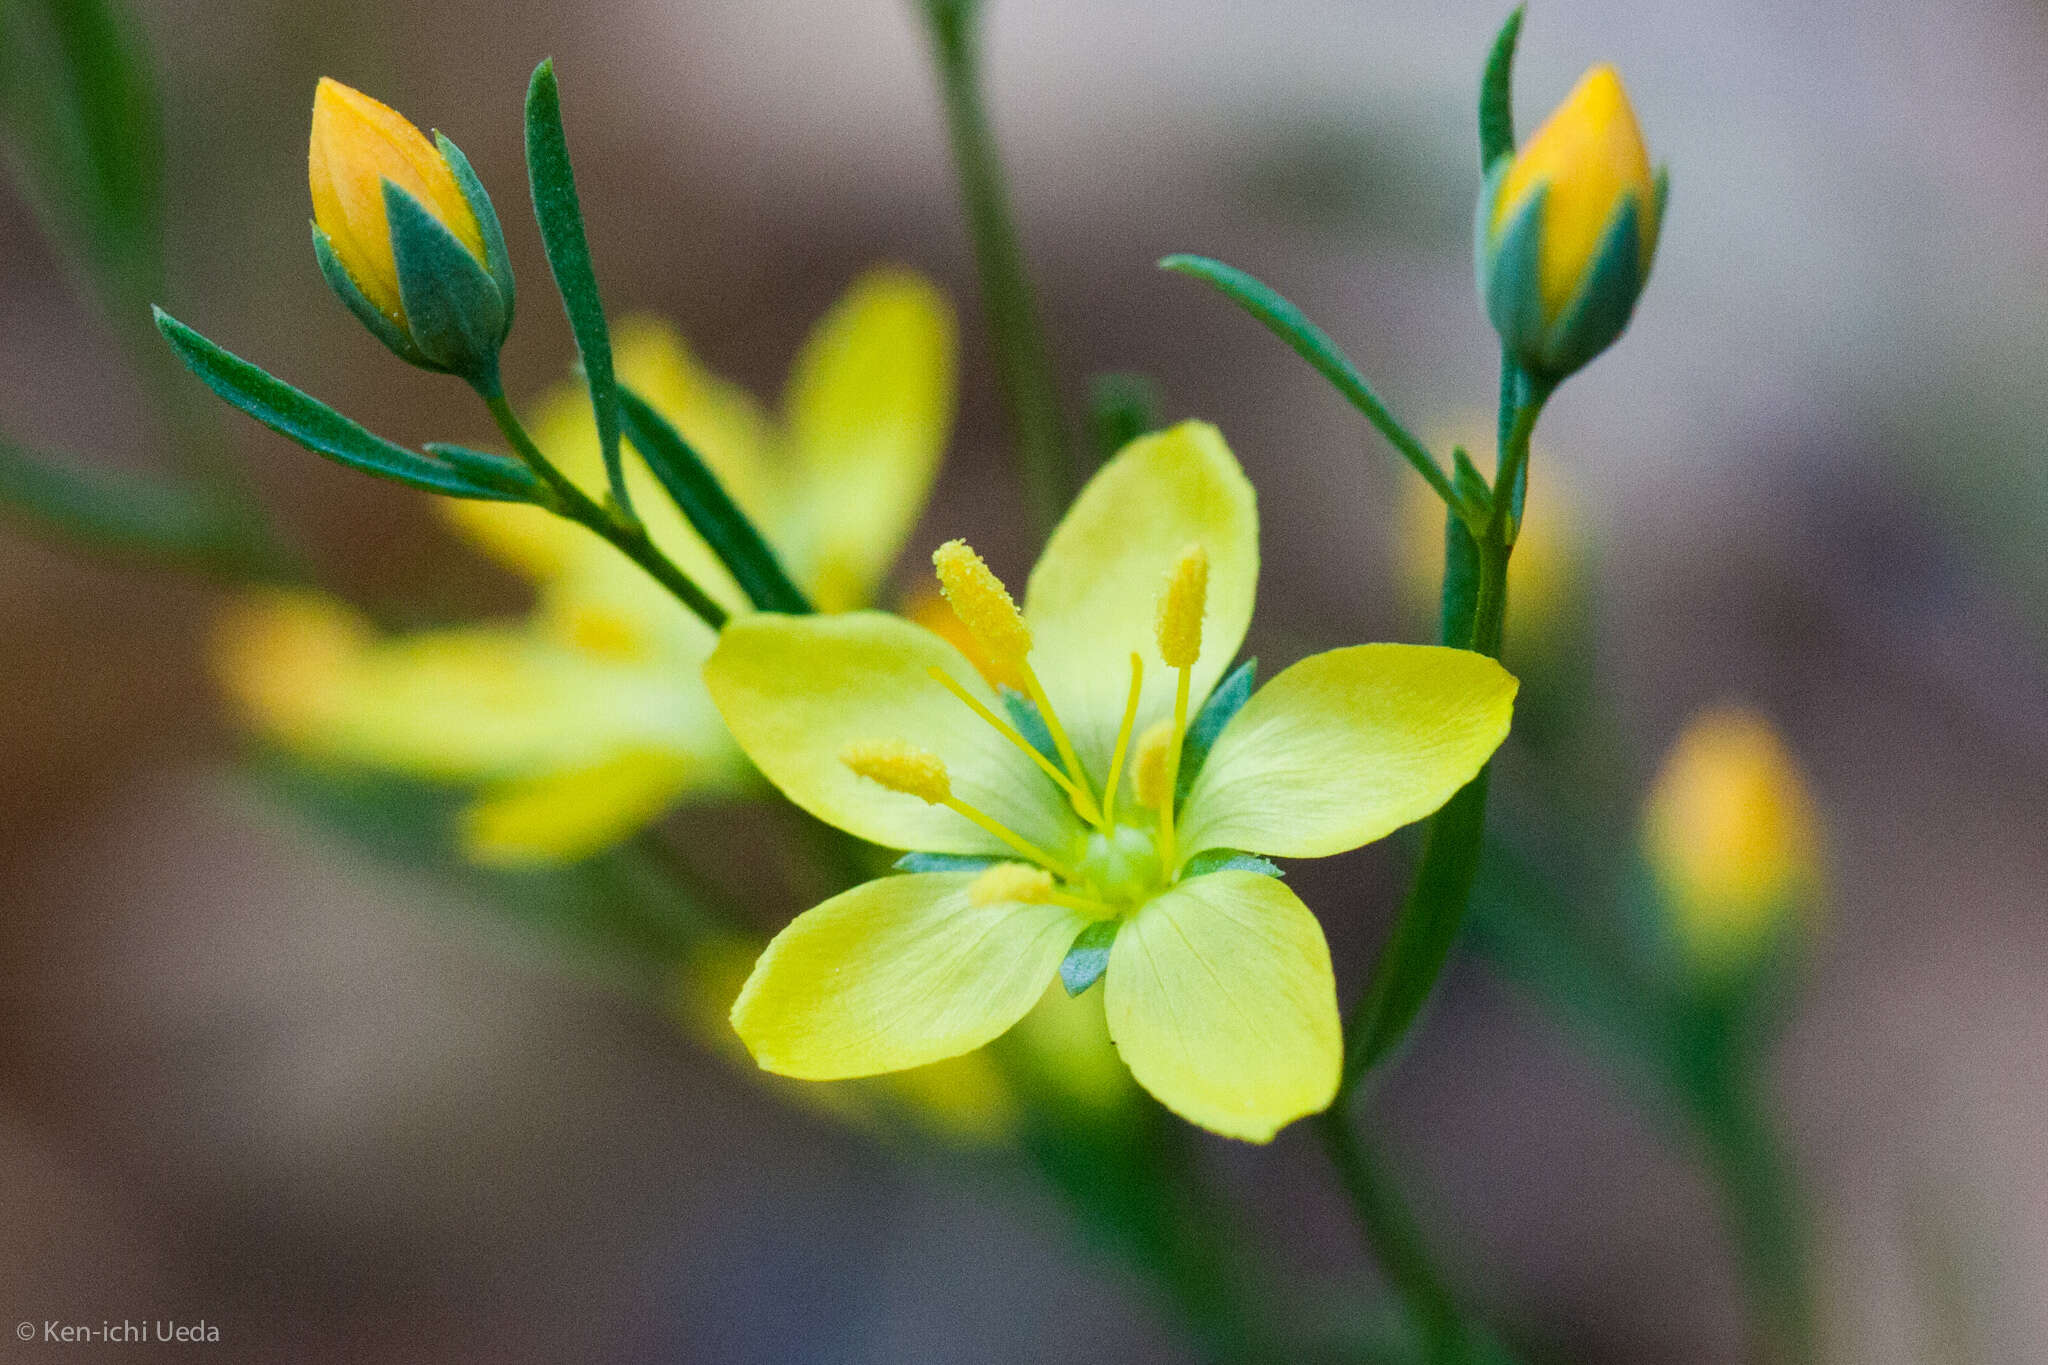 Image of Brewer's dwarf-flax